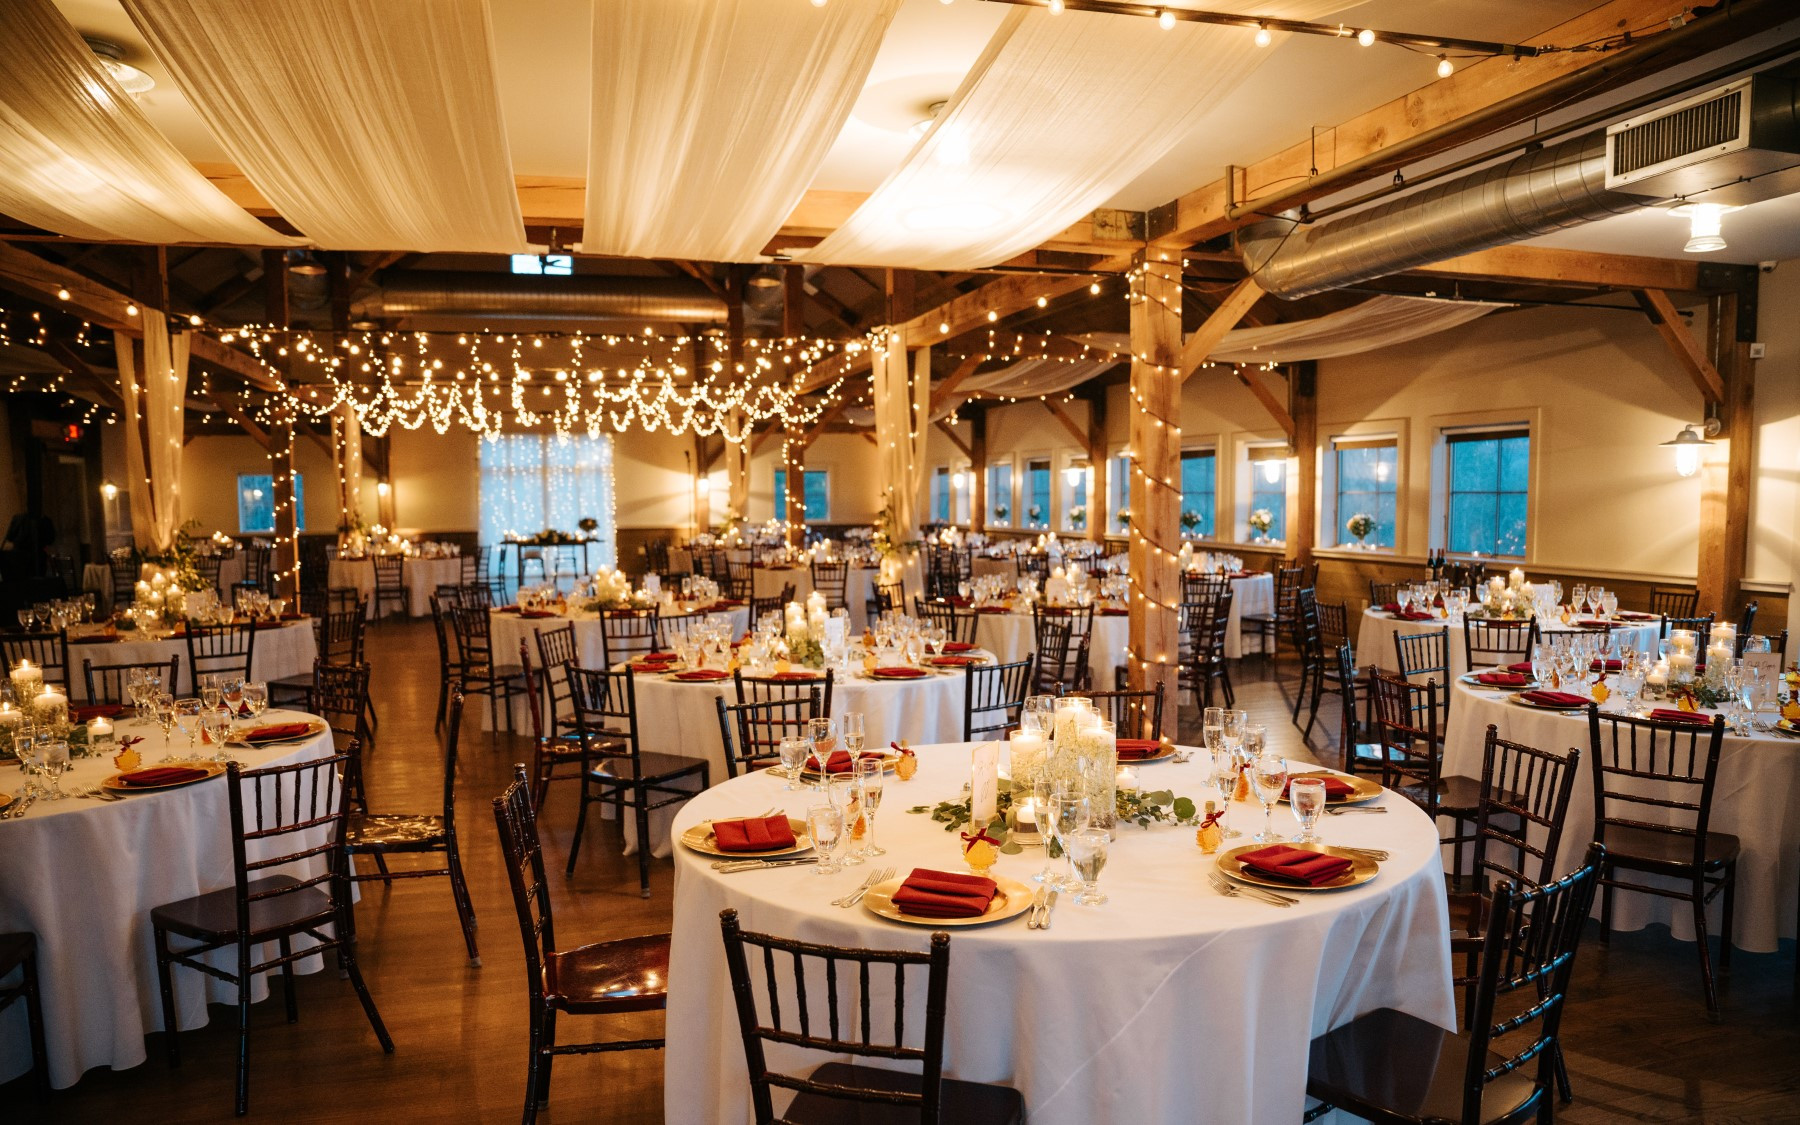 event barn for a reception dinner showcasing ribbons on the ceiling, and table rounds with red table cloths.